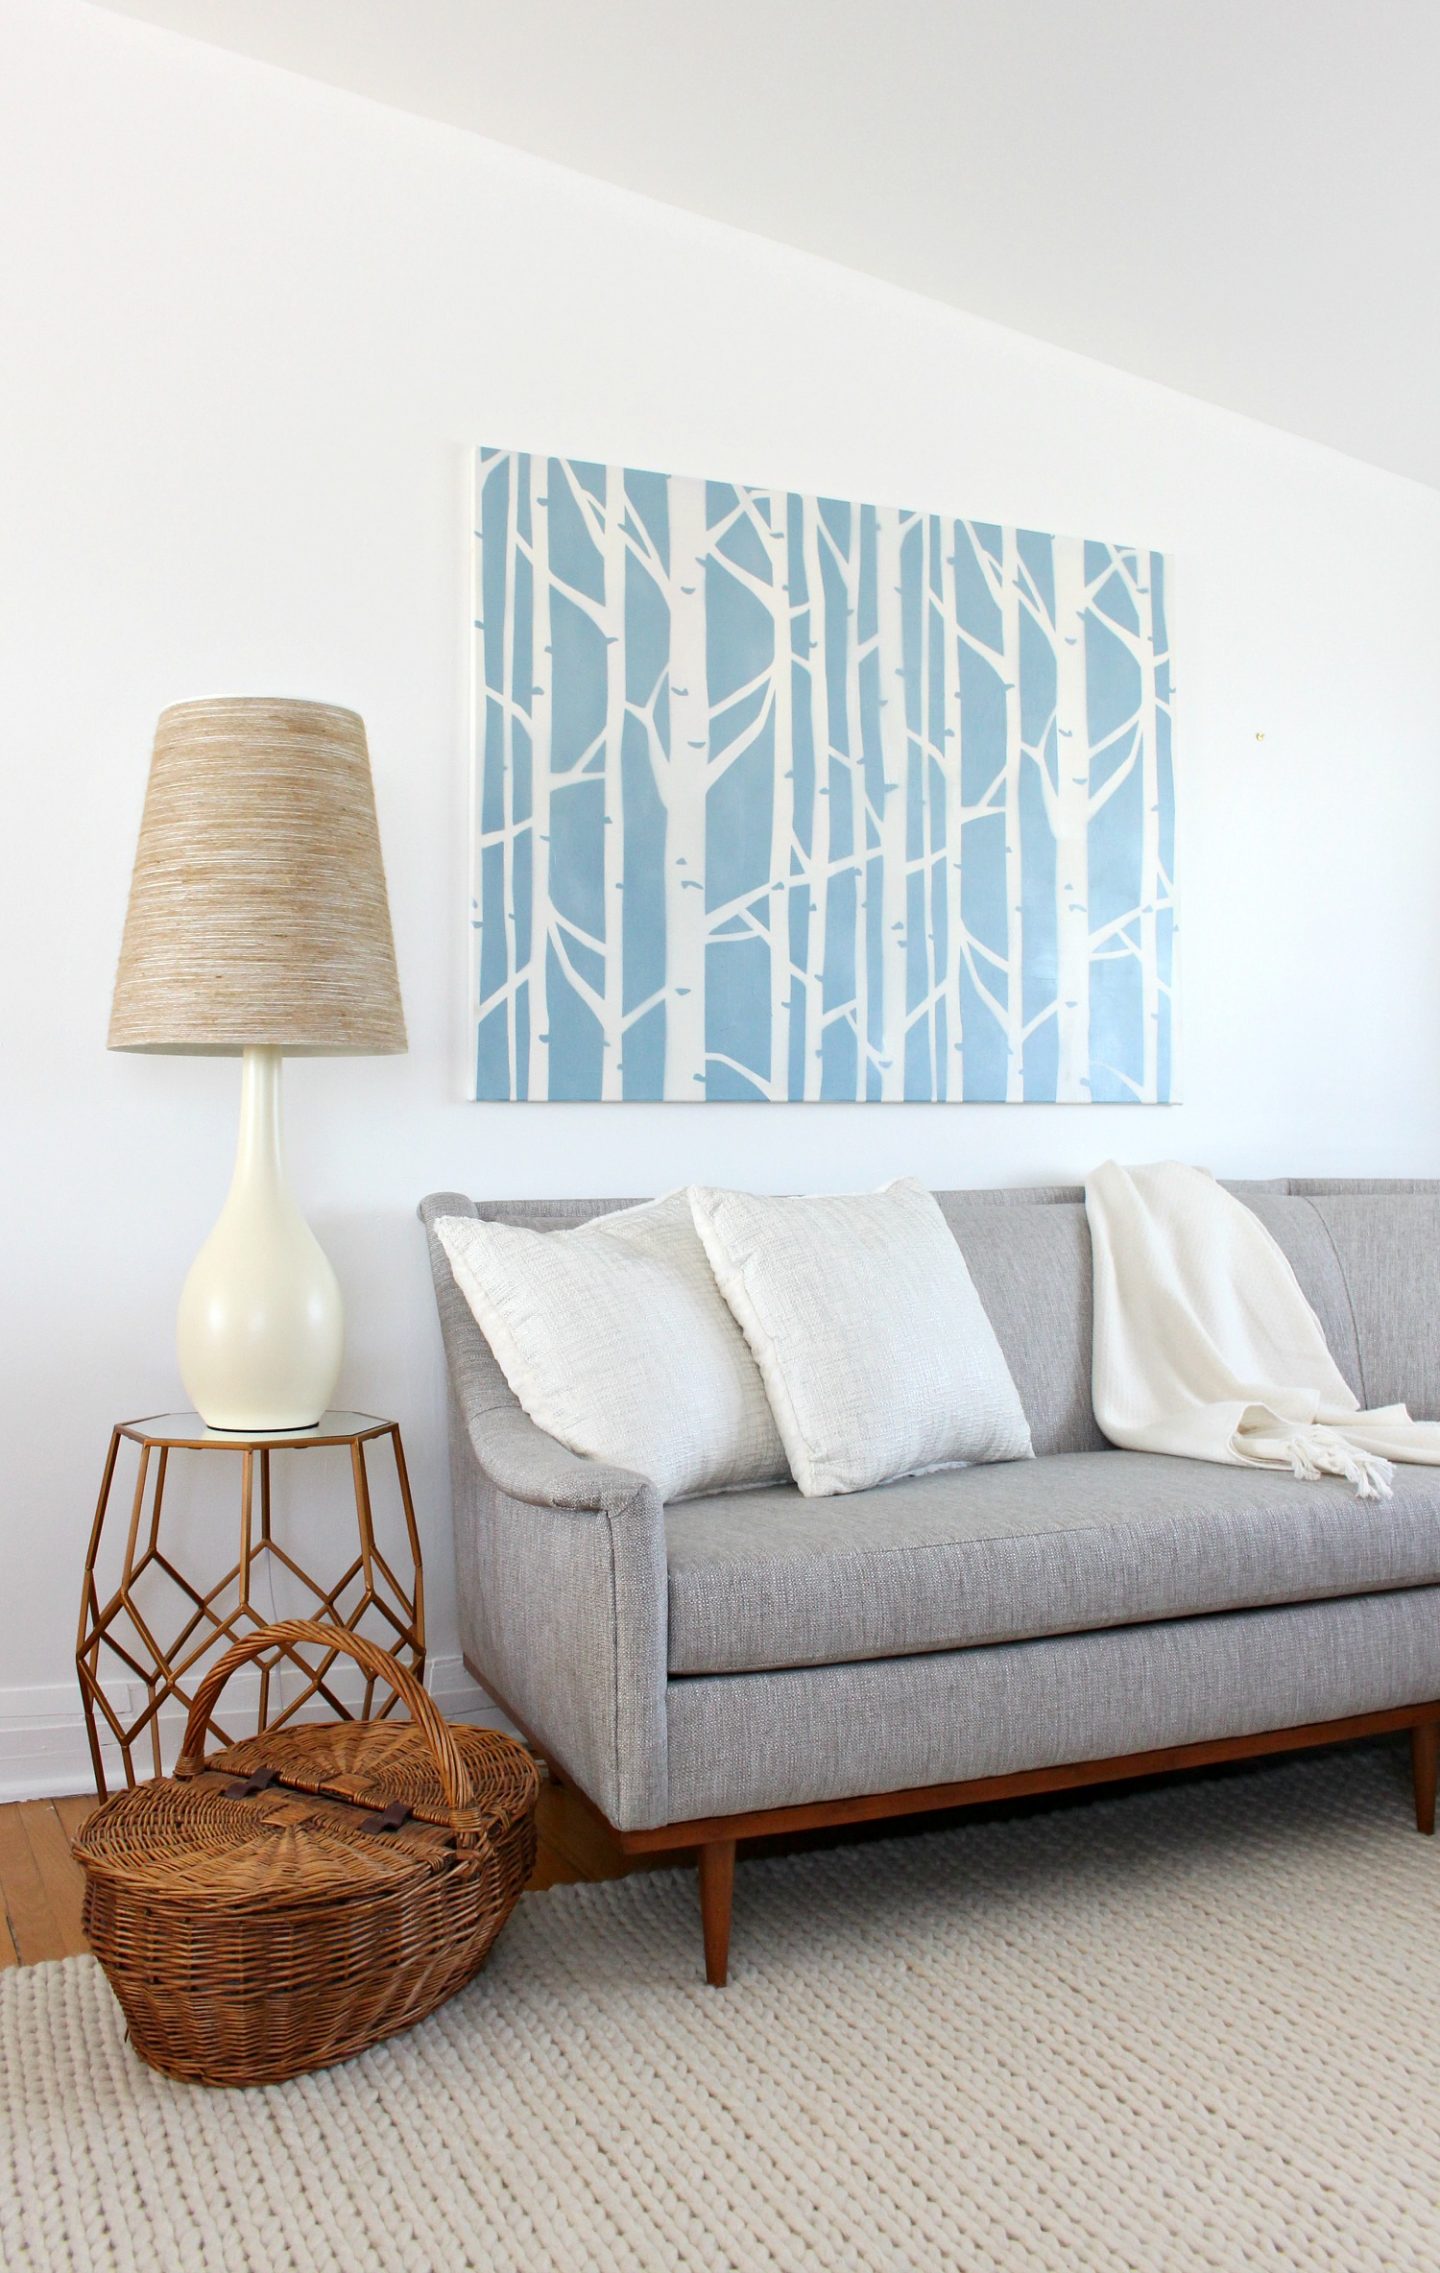 Diy Stenciled Art - Studio Couch , HD Wallpaper & Backgrounds